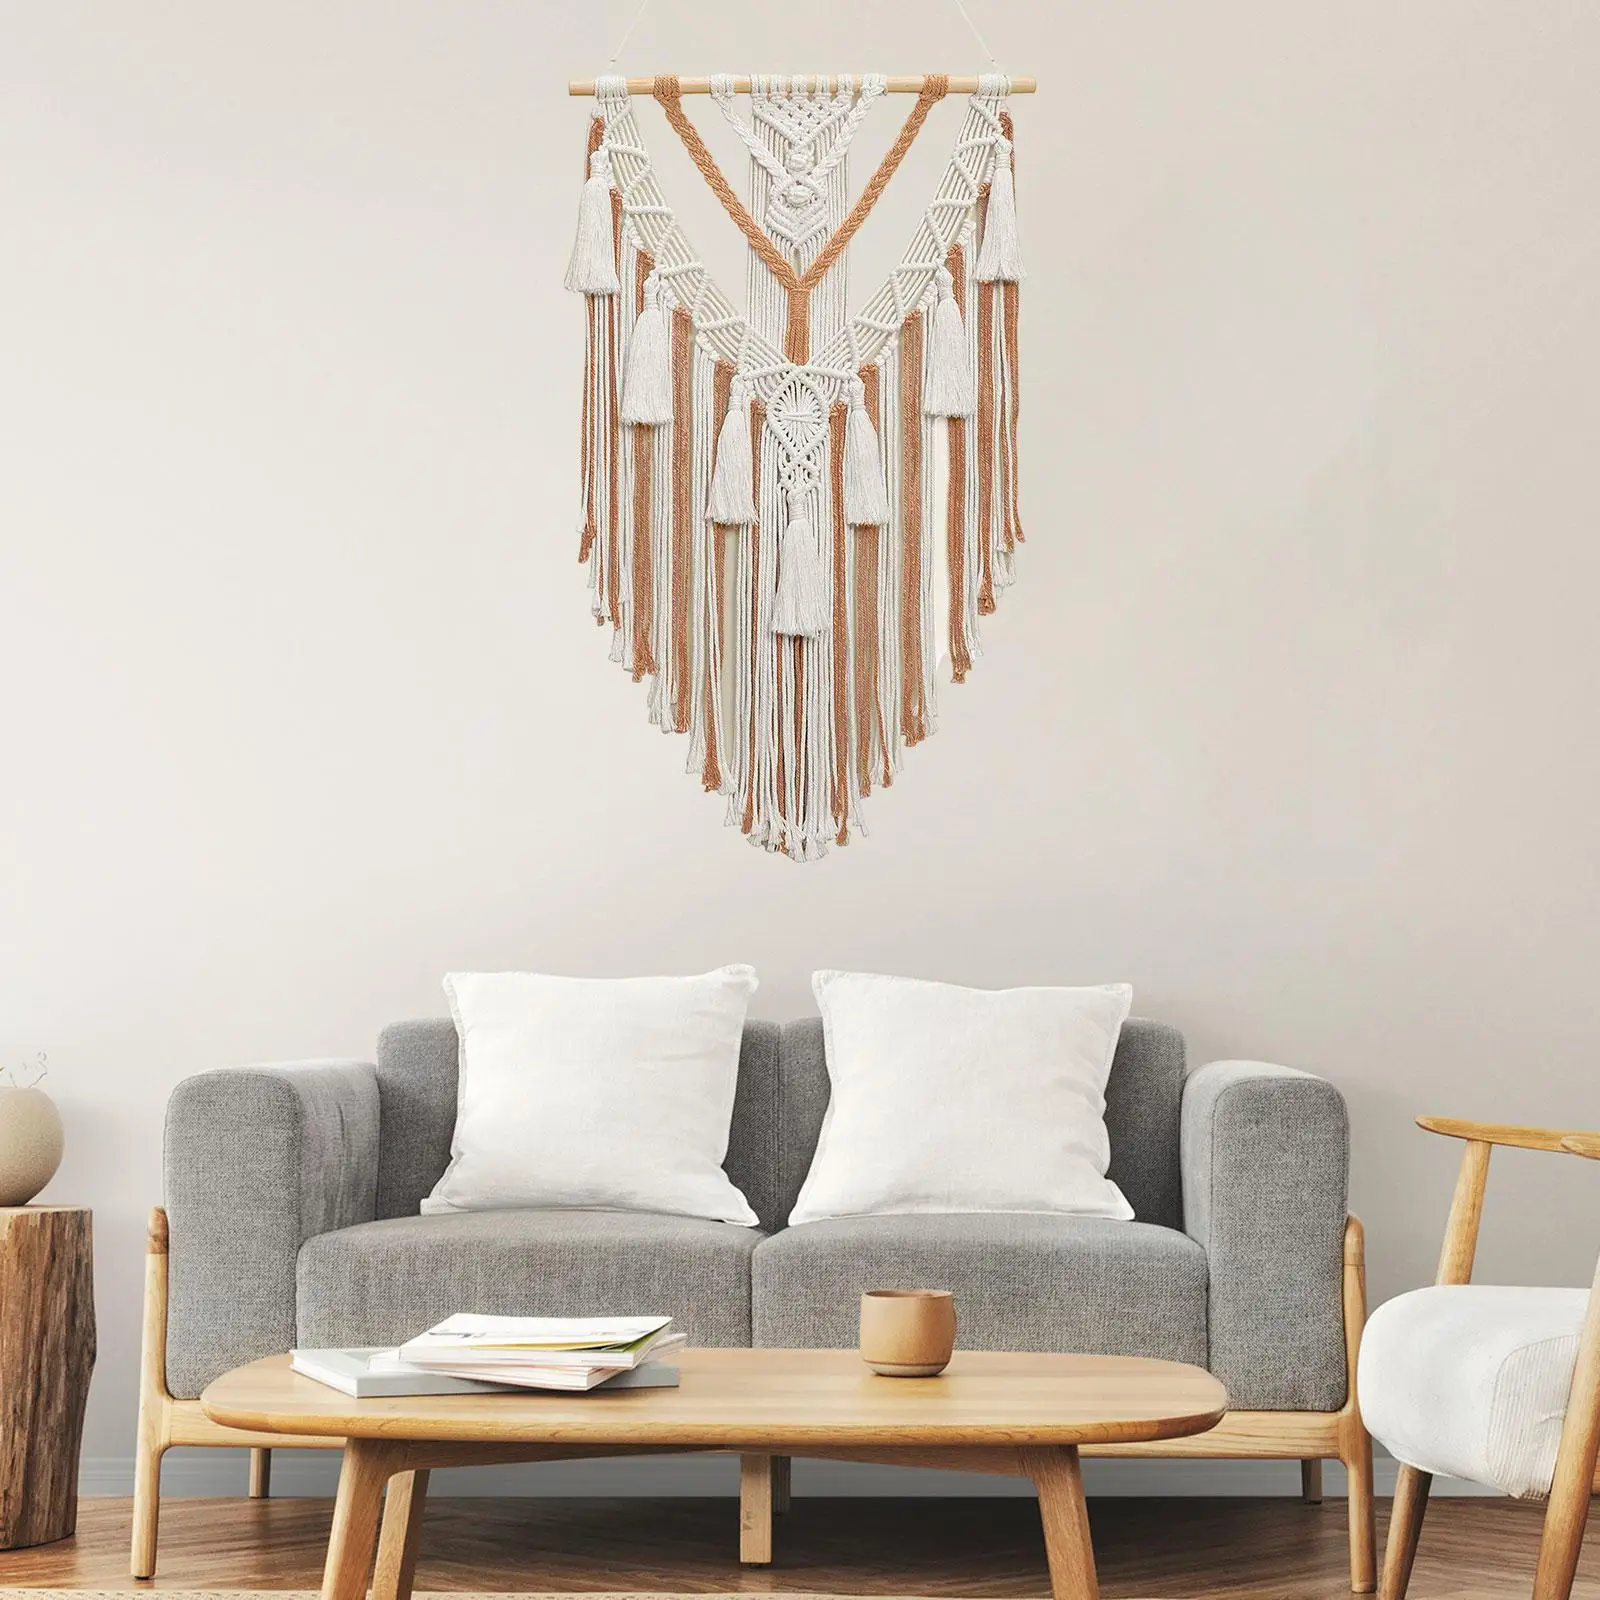 Hand Woven Tapestry Chic Backdrop Macrame Wall Hanging Wall Decor Woven Tapestry for Dorm Bedroom Apartment Living Room Nursery